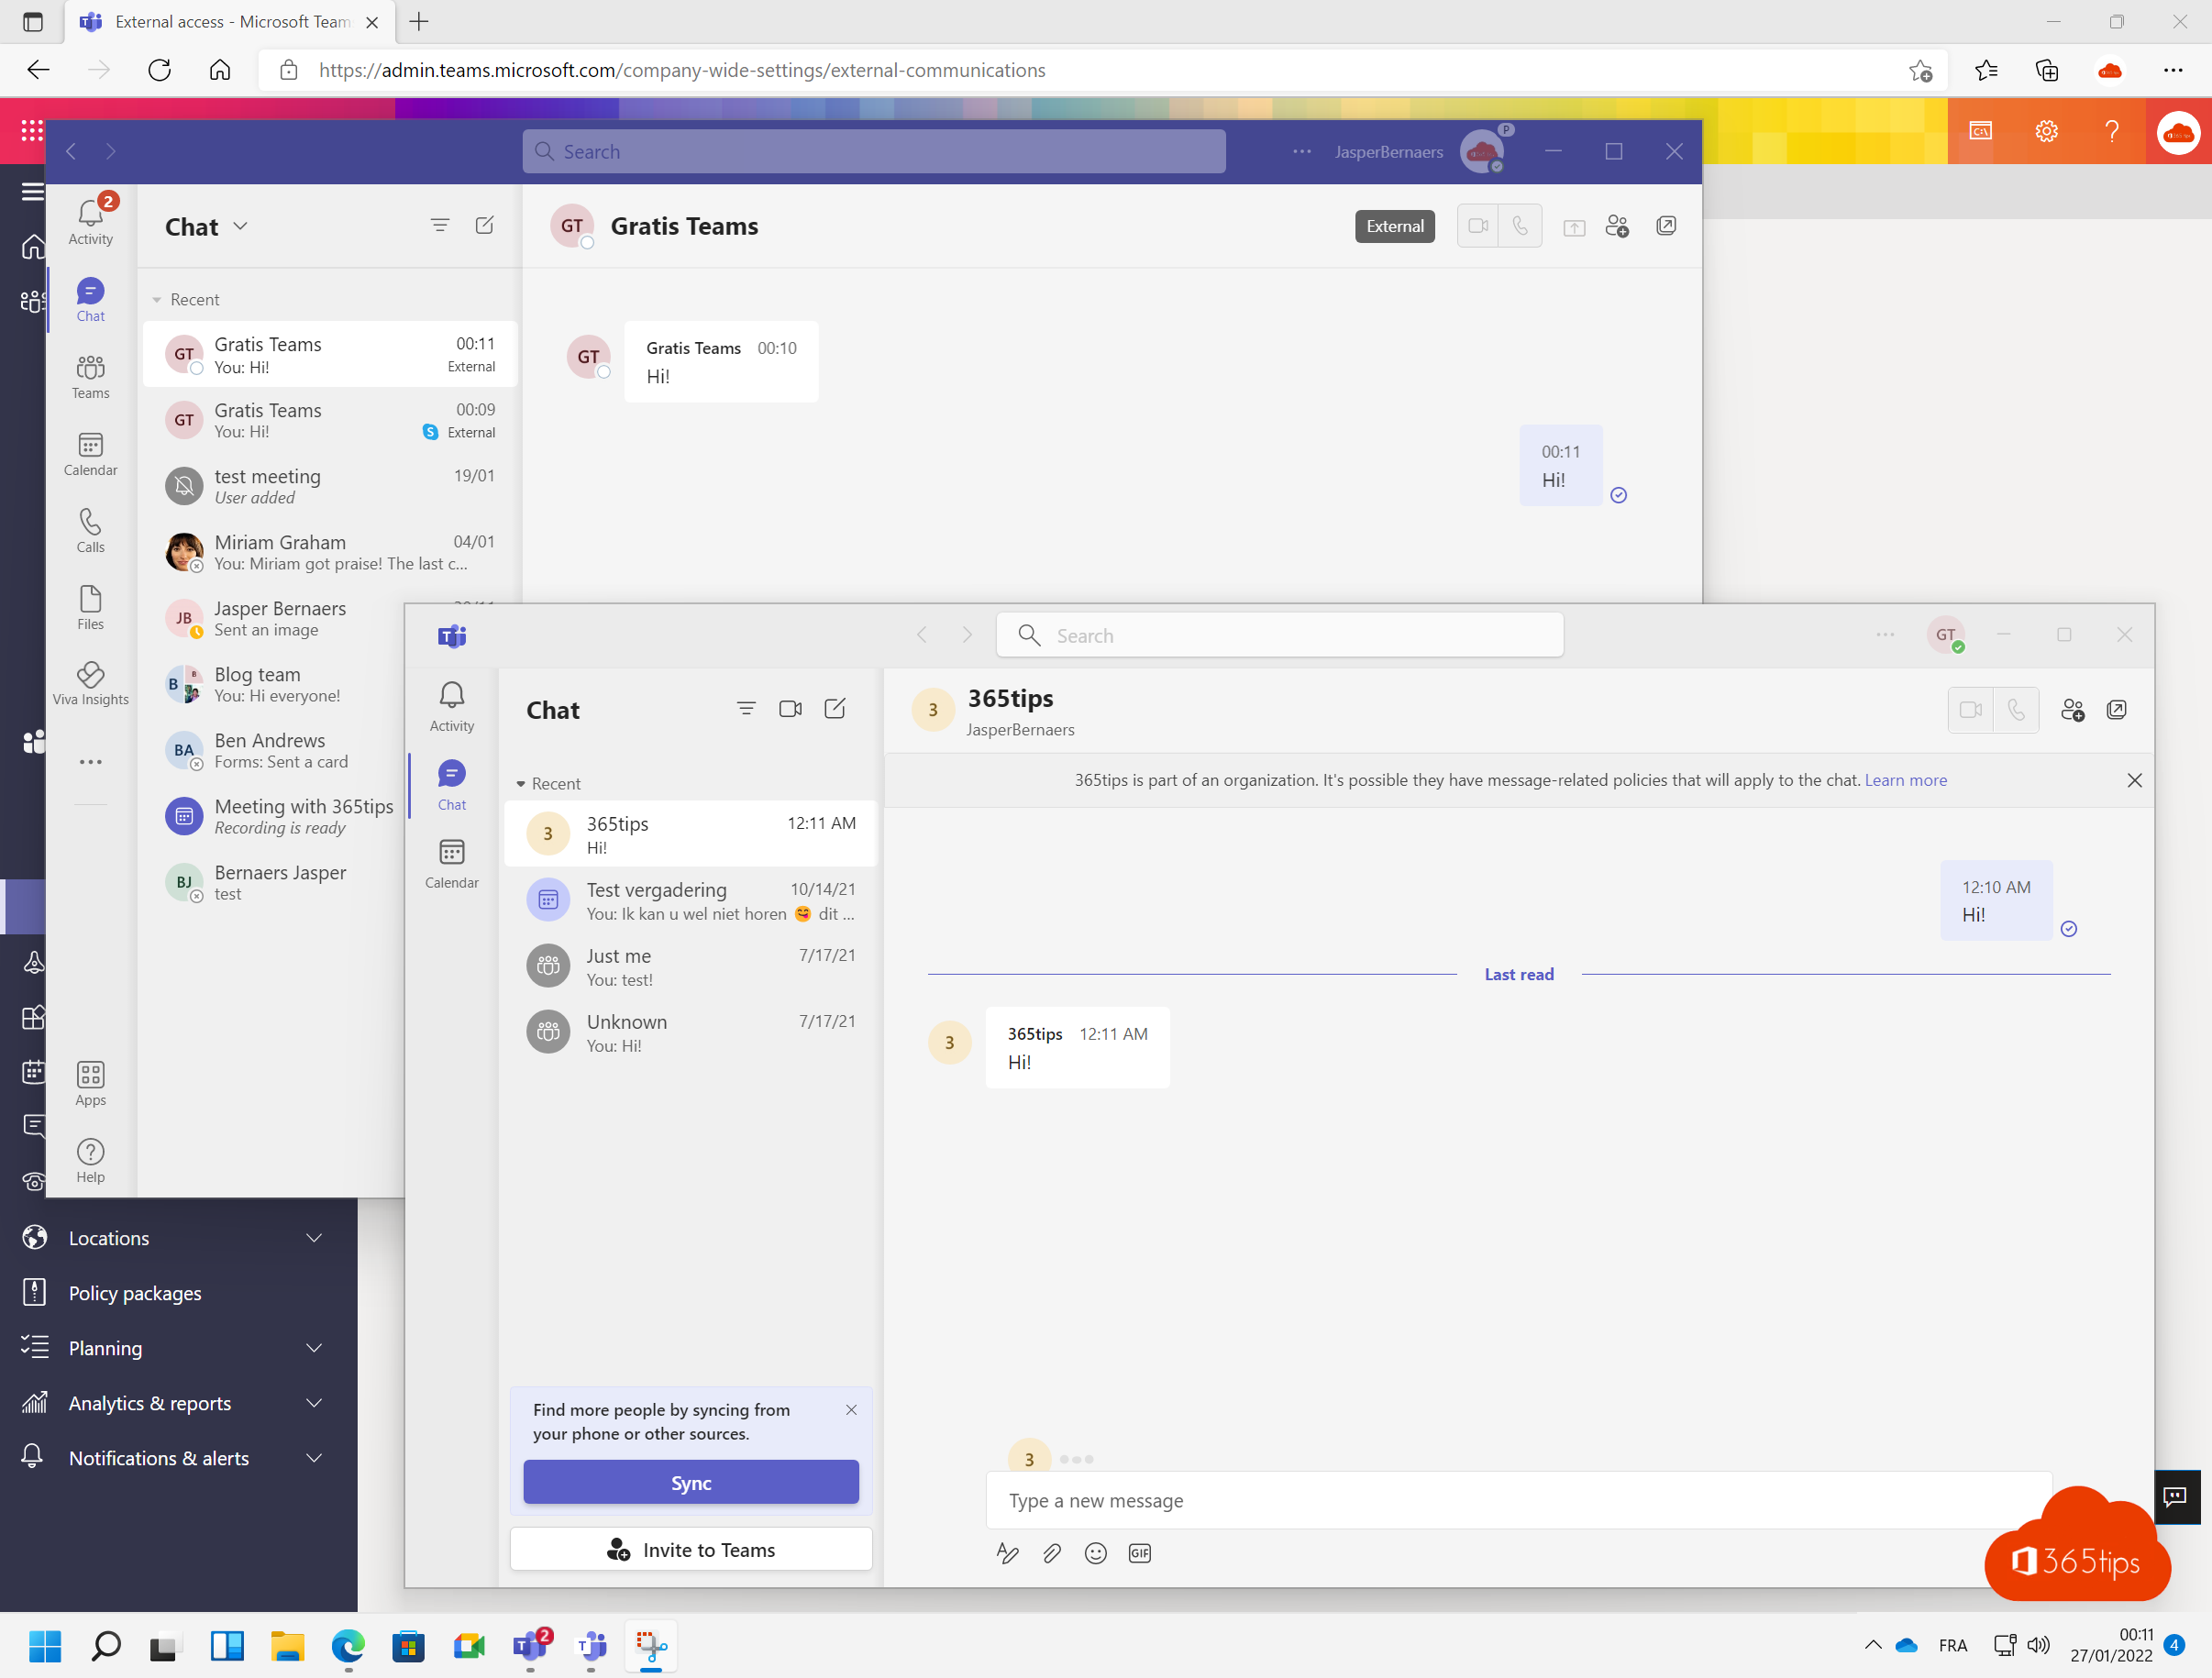 🧑🤝🧑 Microsoft Teams-users can now communicate with any Teams-user outside the organization